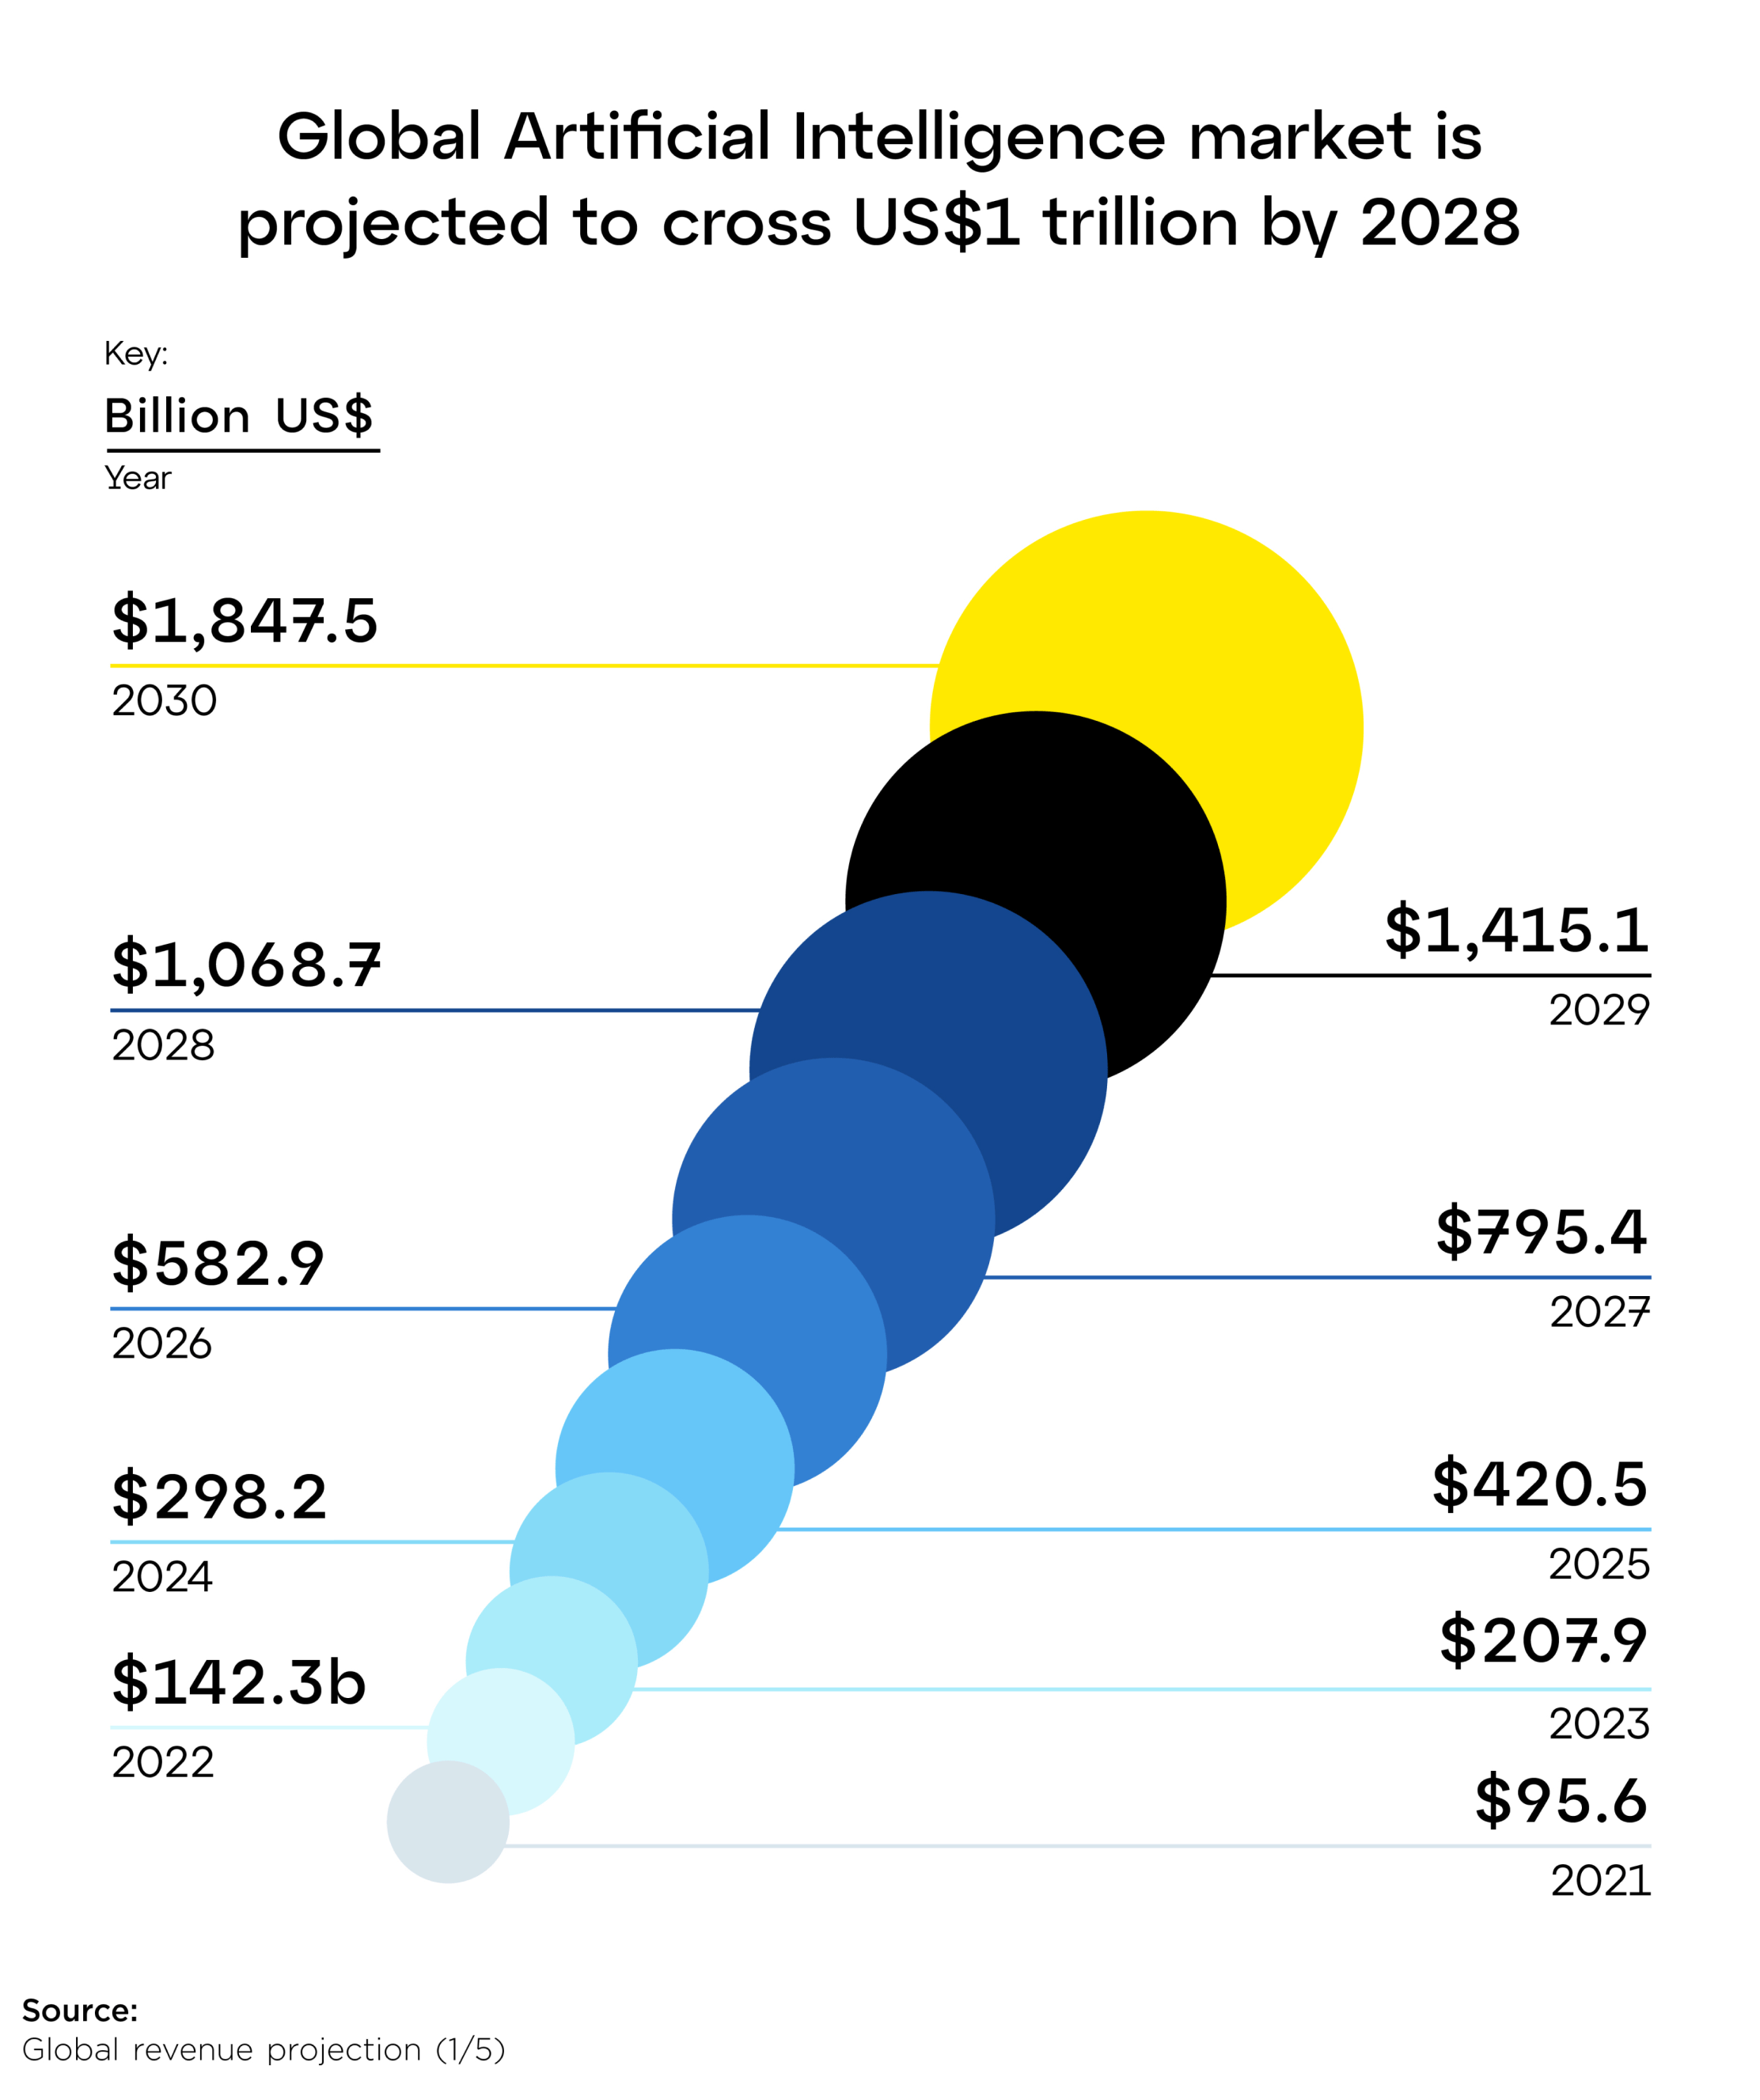 Graph showing Global Artificial Intelligence market is projected to cross US$1 trillion by 2028.